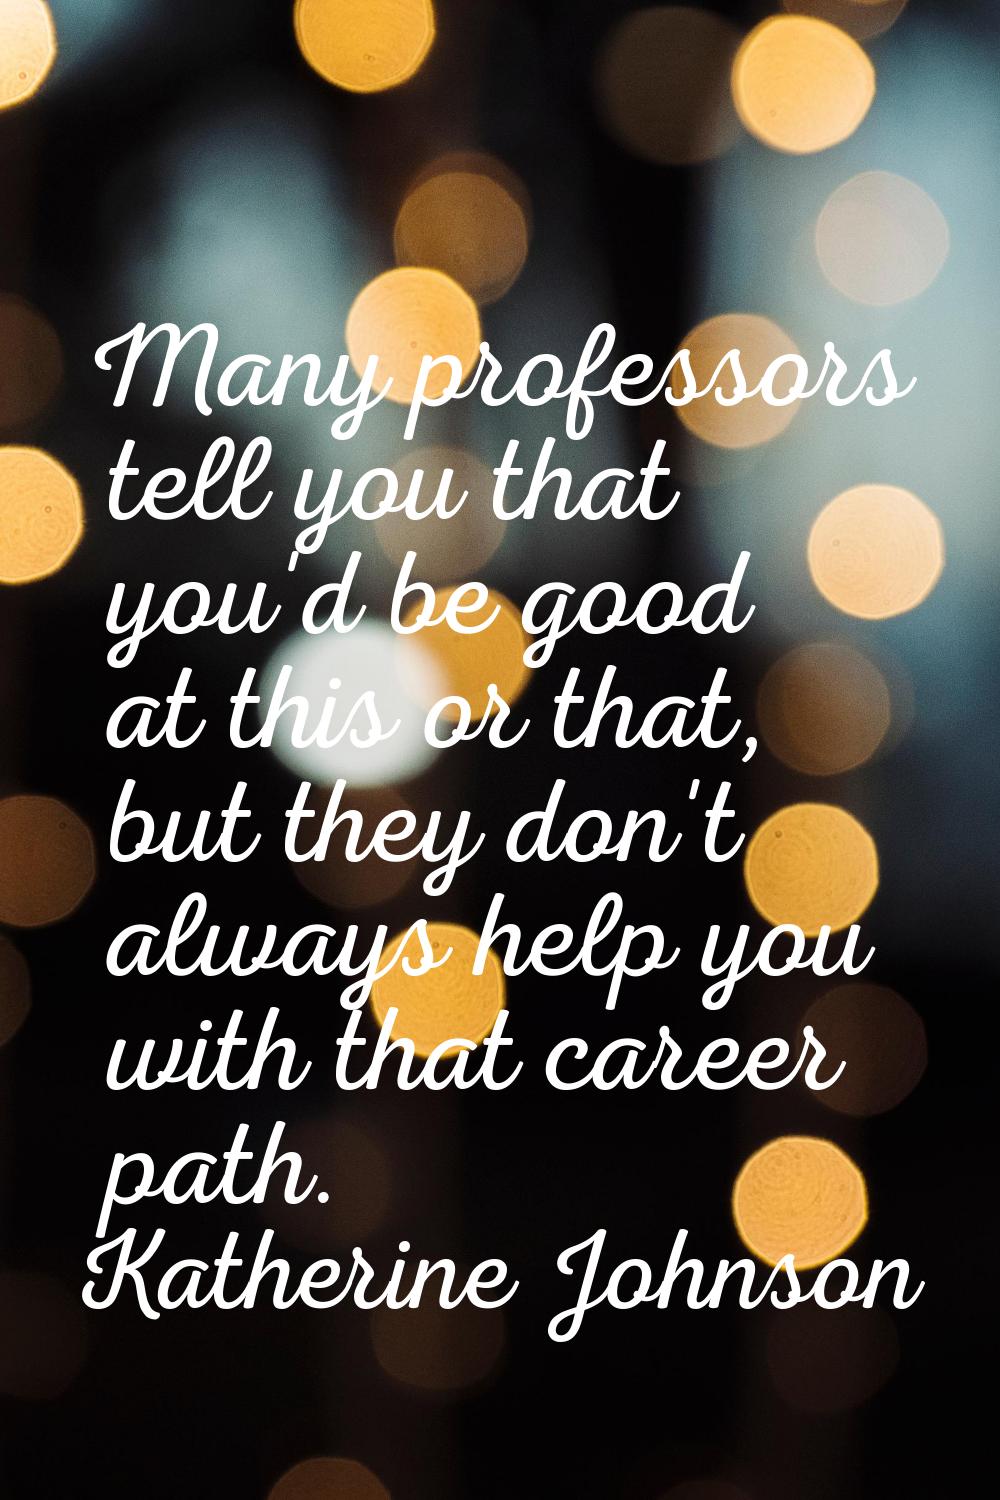 Many professors tell you that you'd be good at this or that, but they don't always help you with th